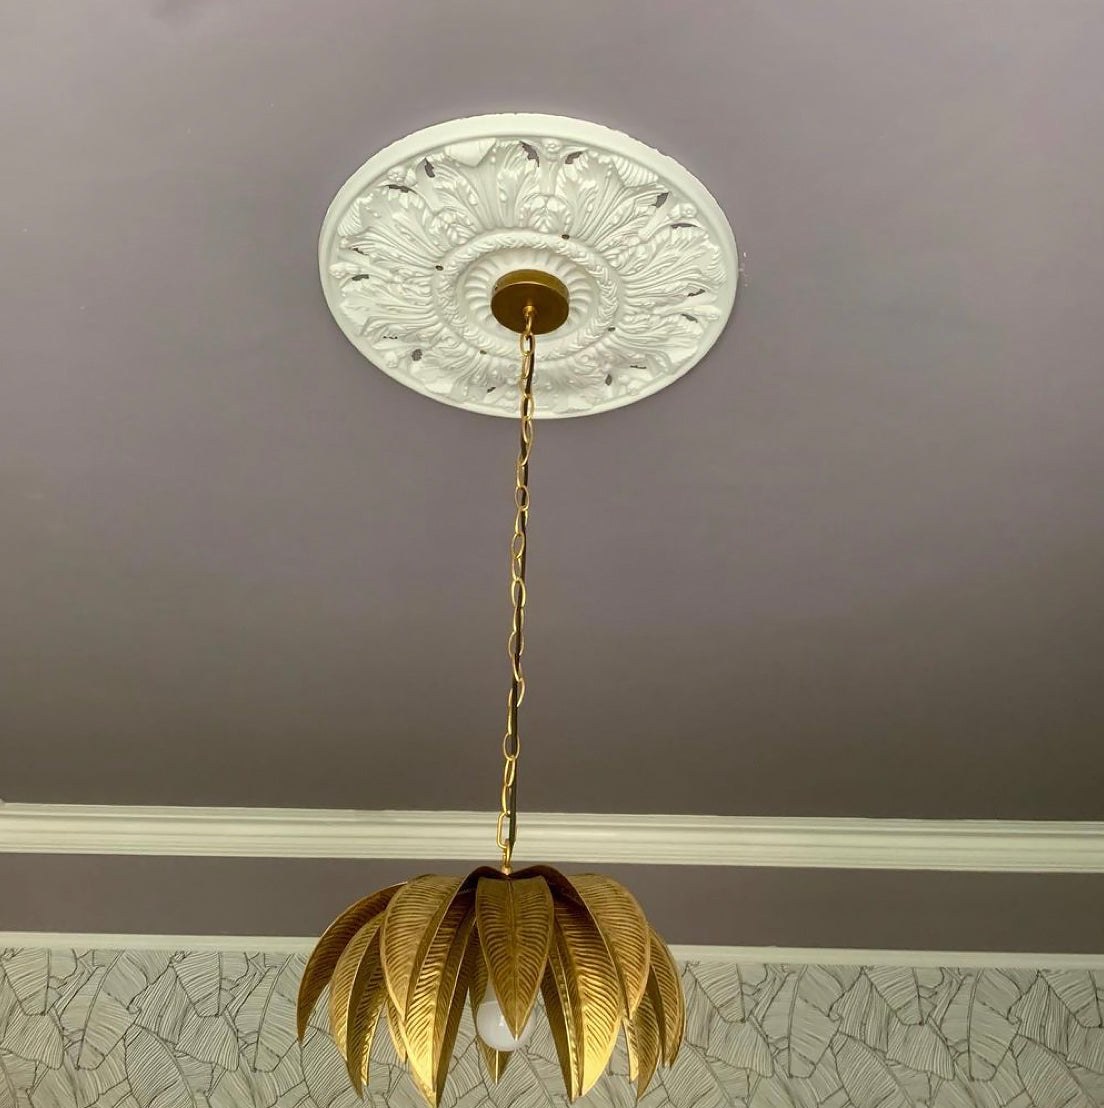 520mm crown and acanthus plaster ceiling rose decorated and installed 